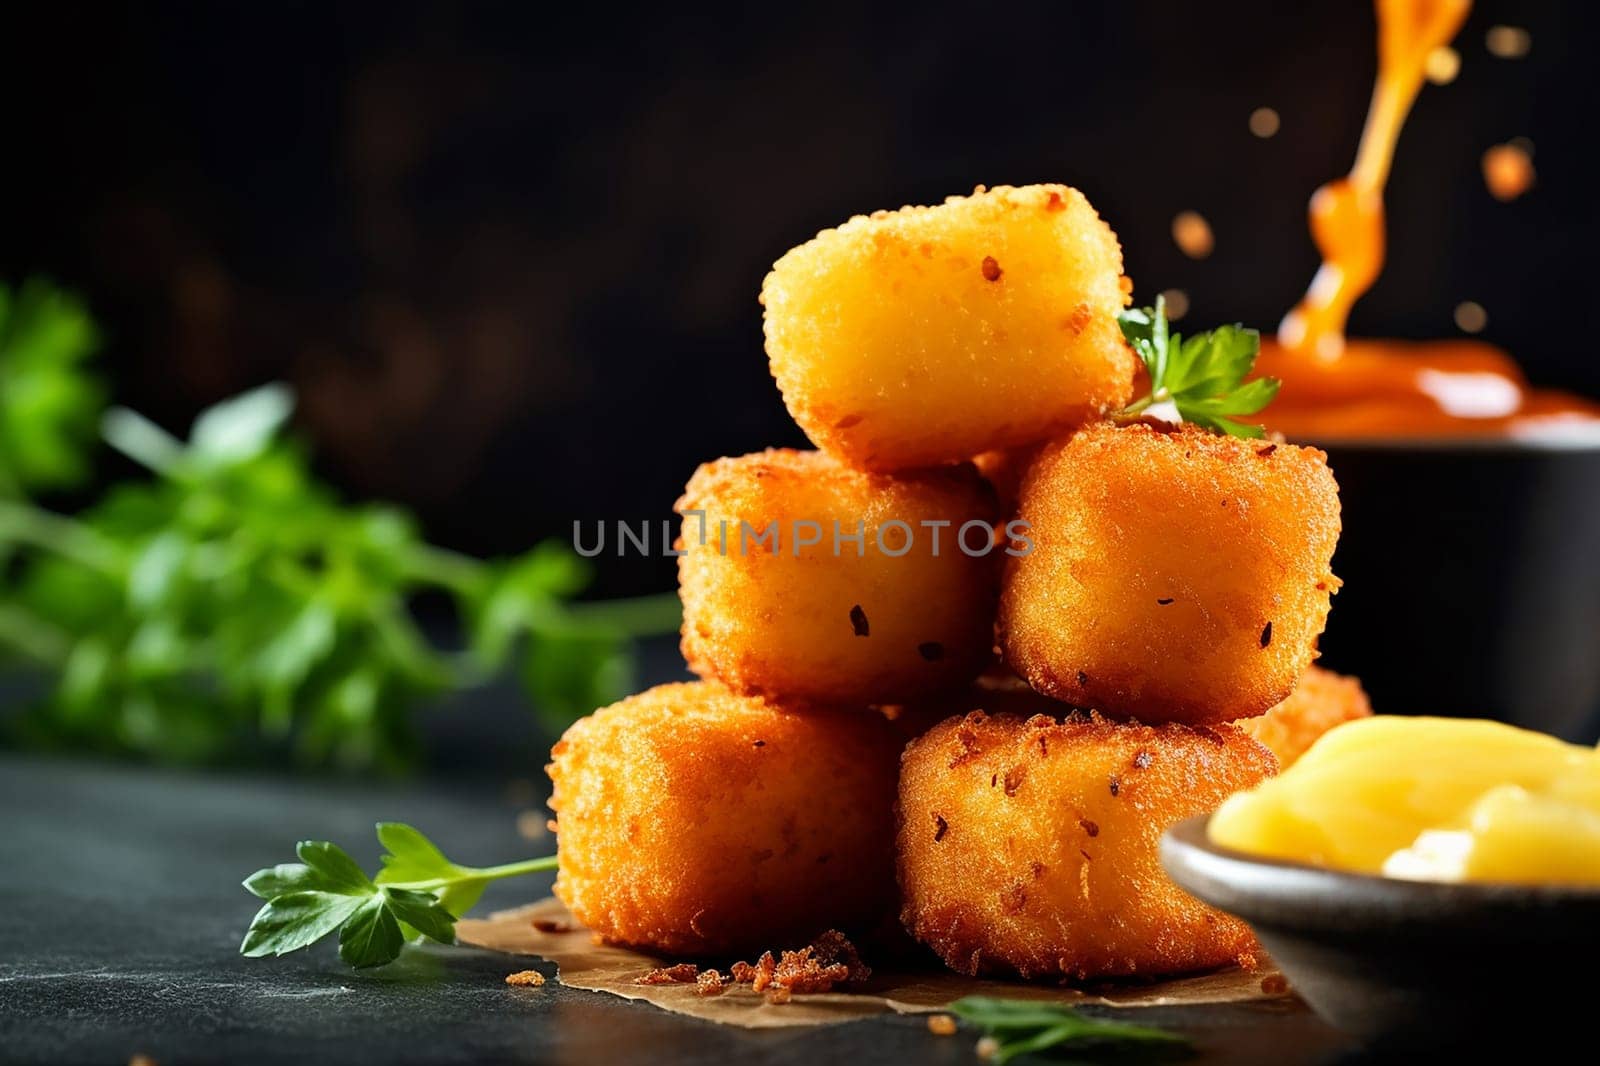 Crispy golden fried cheese cubes with dipping sauce and garnish.